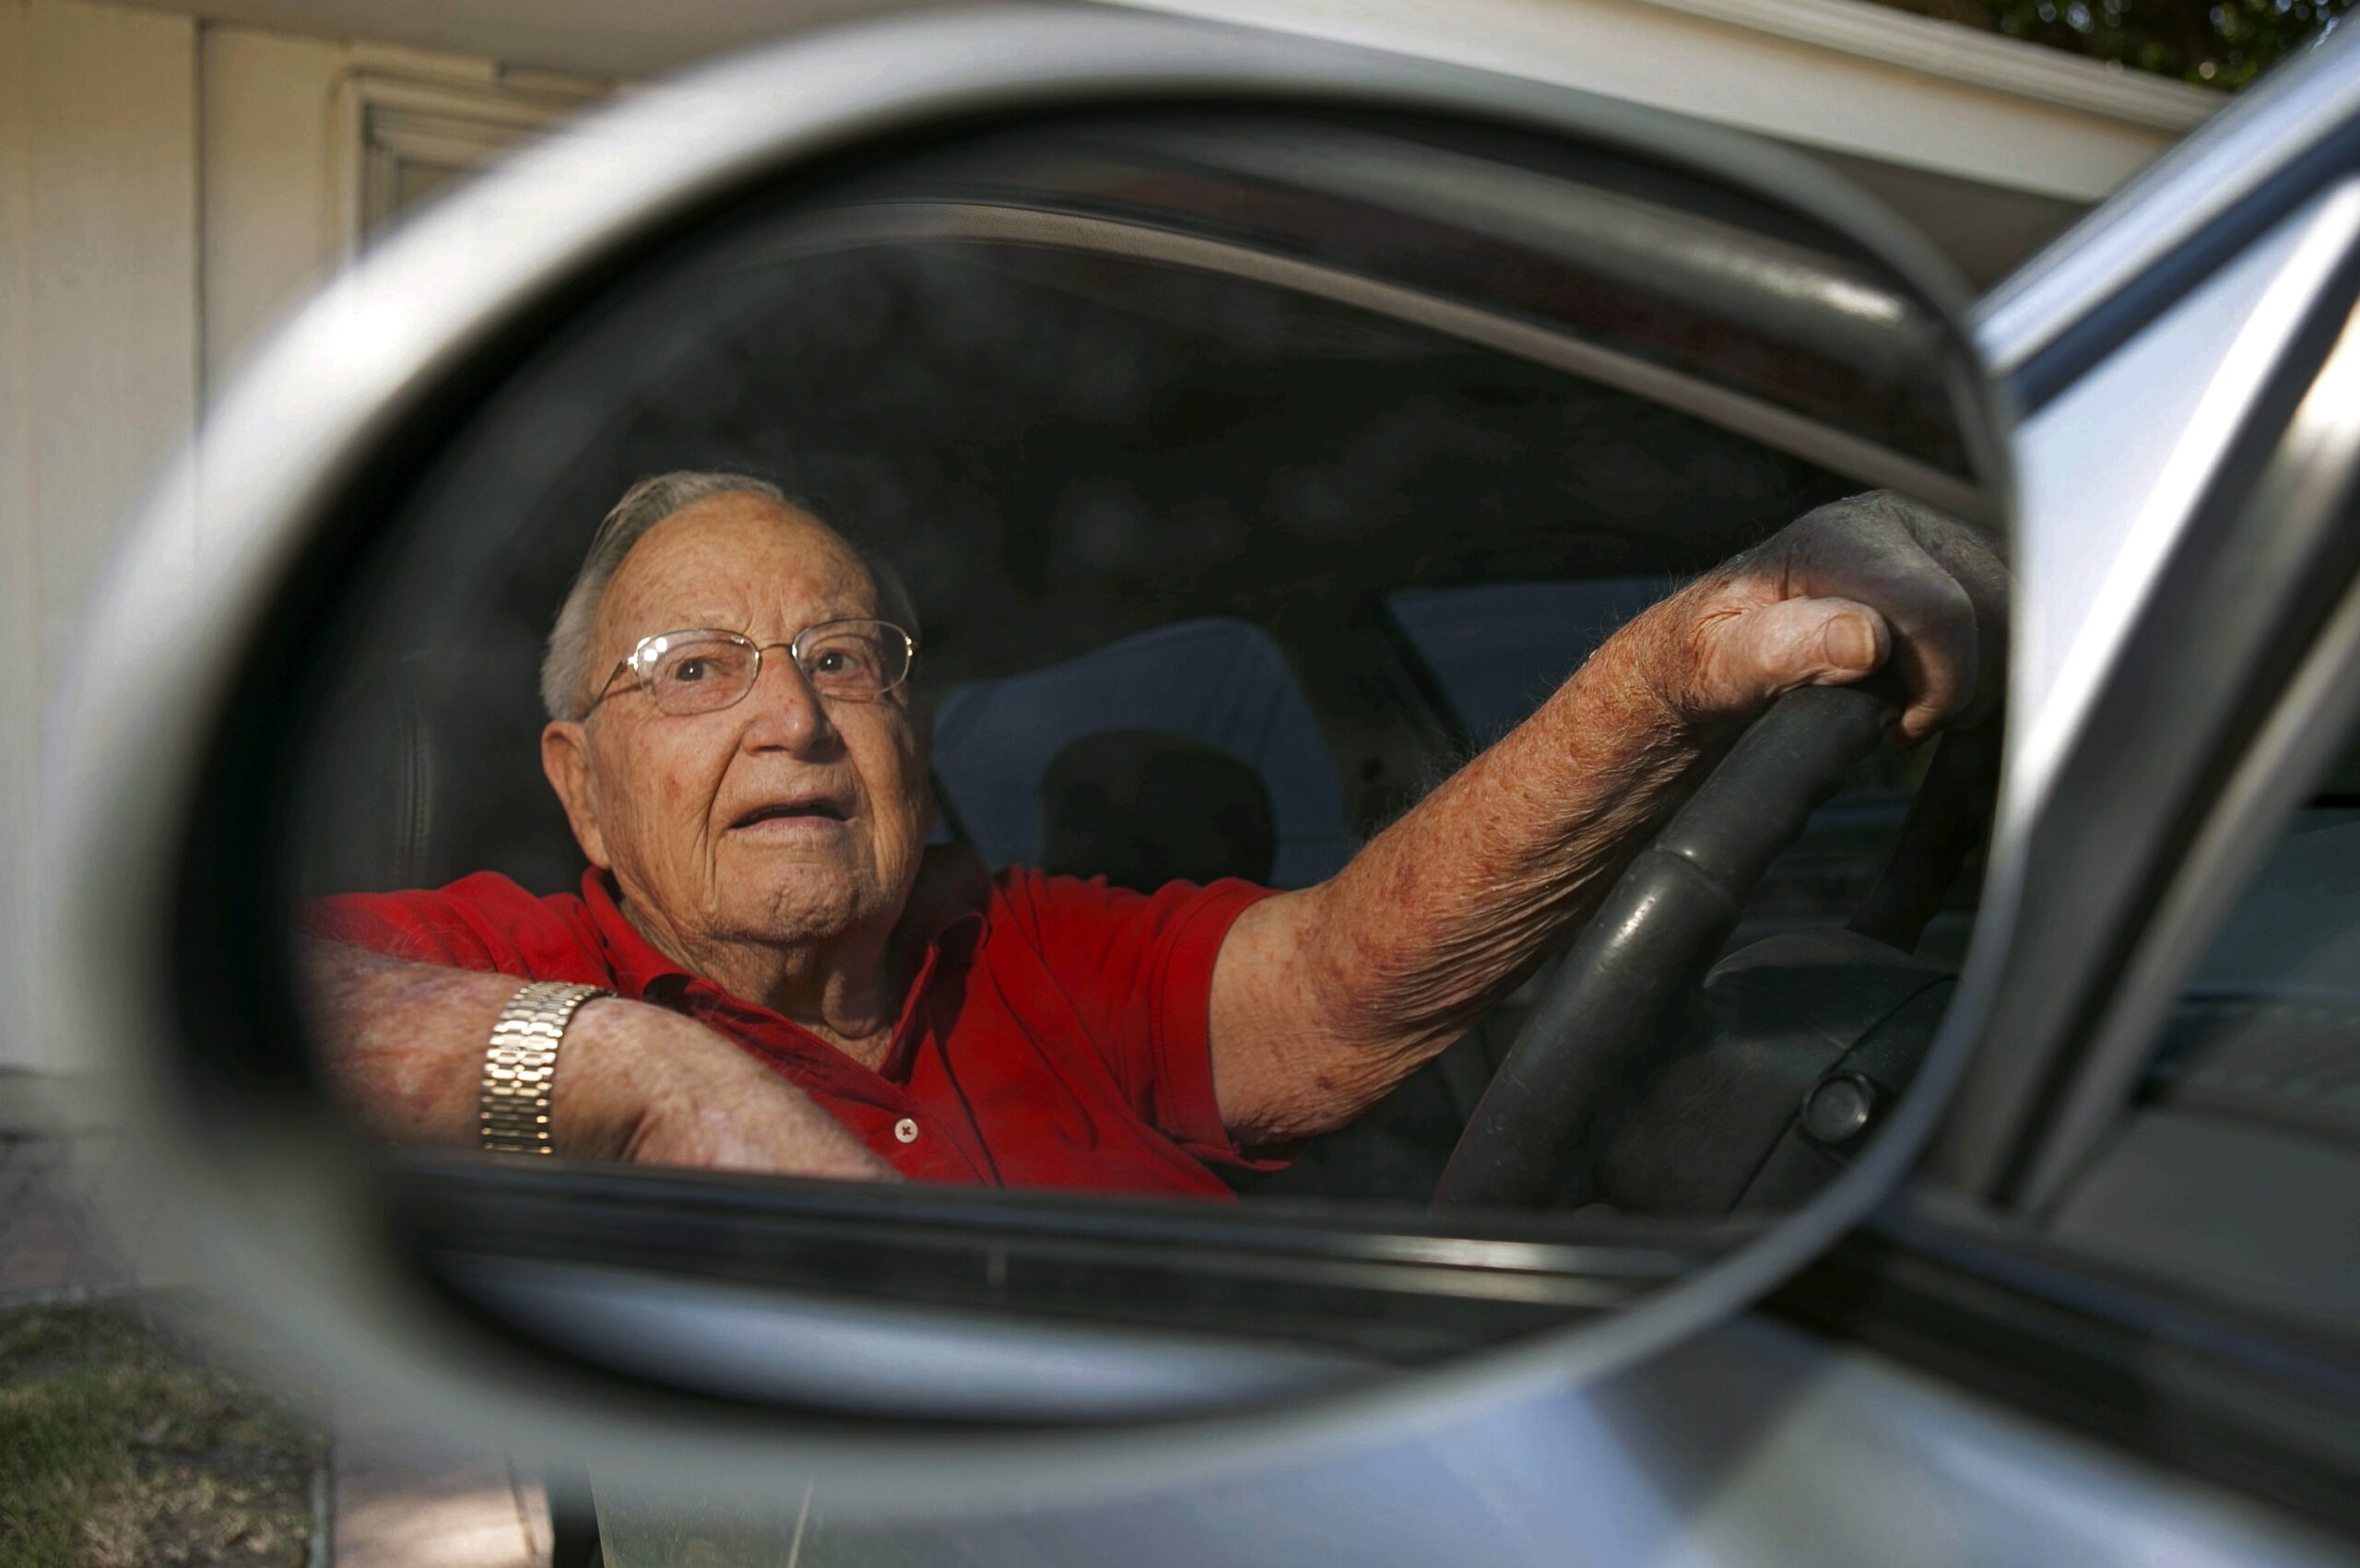 Jack Wyrad, 92, is seen reflected on his side mirrors